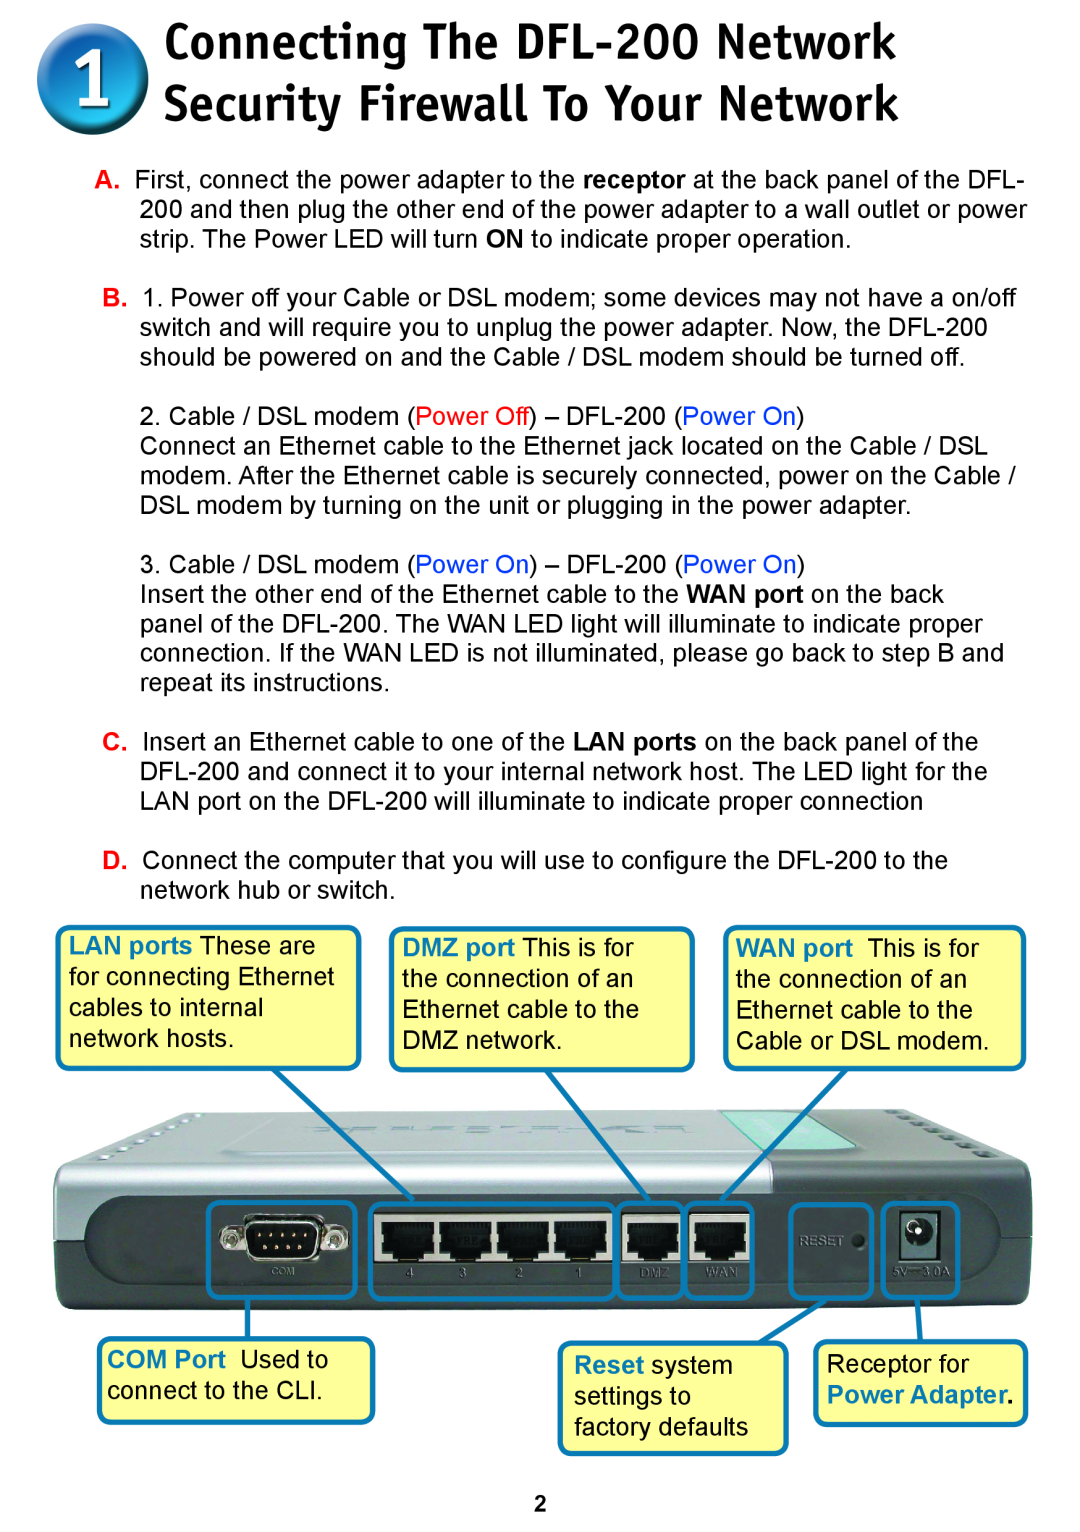 D-Link warranty Connecting The DFL-200 Network Security Firewall To Your Network, LAN ports These are, COM Port Used to 